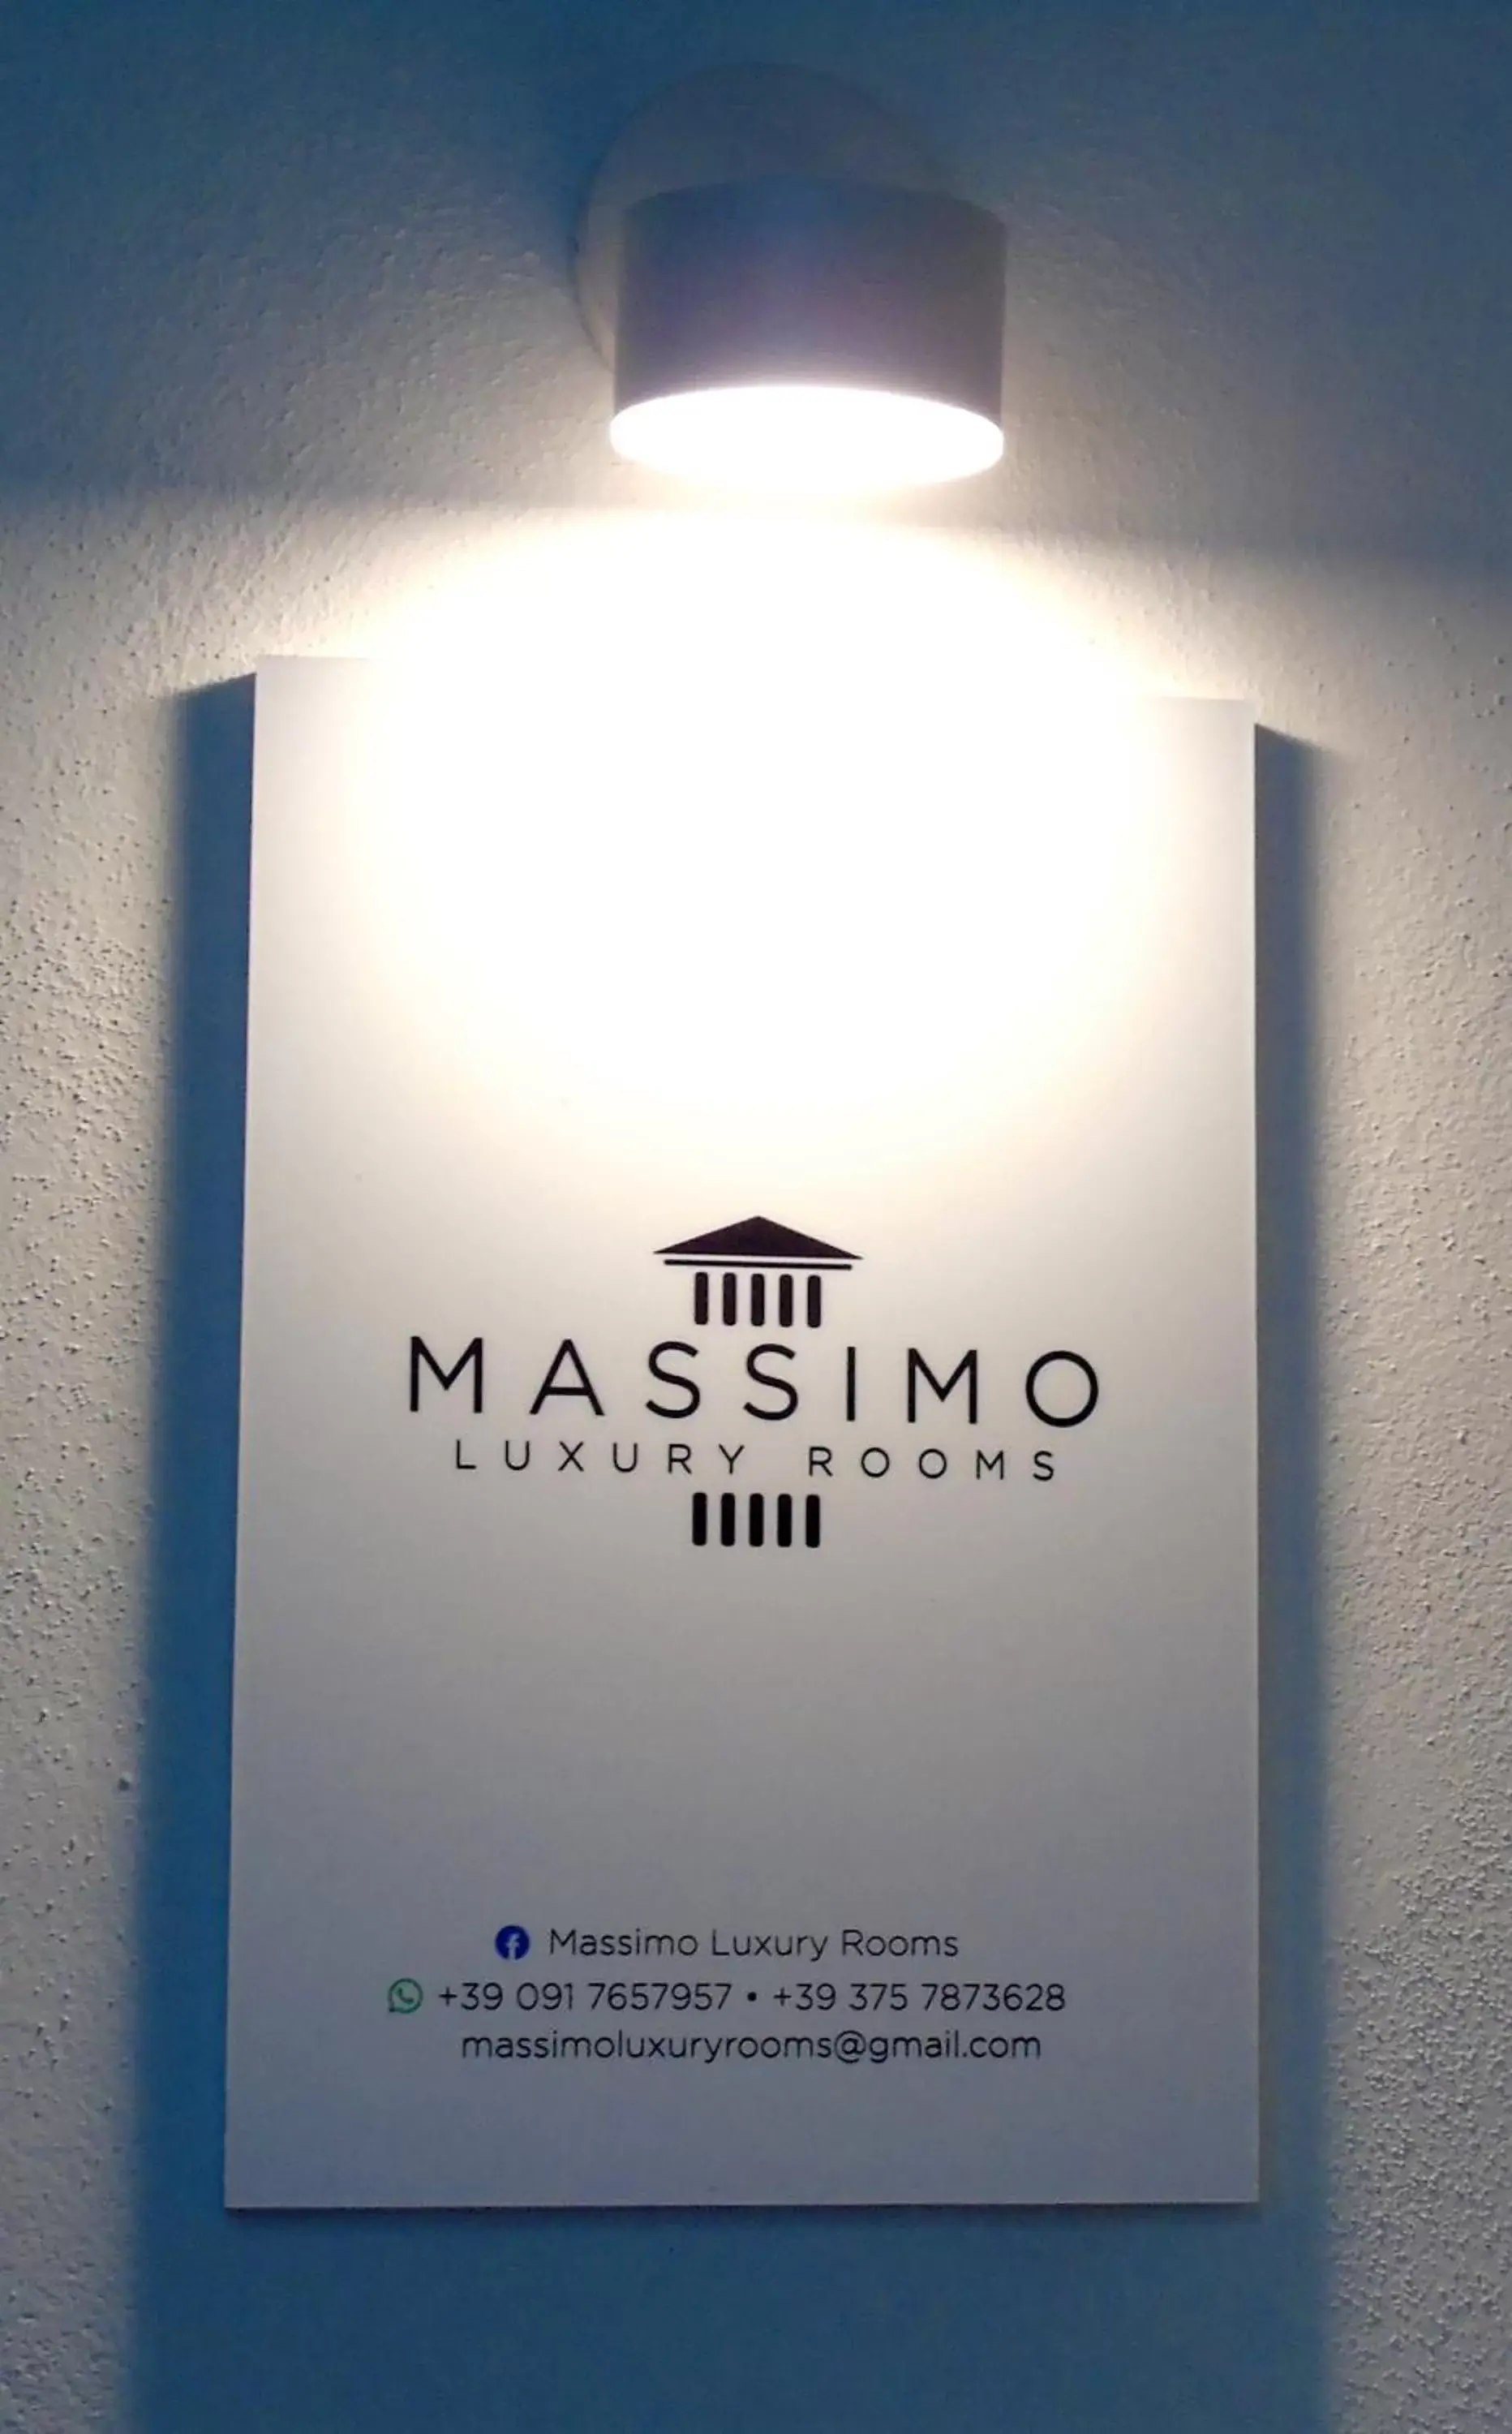 Property logo or sign in Massimo Luxury Rooms